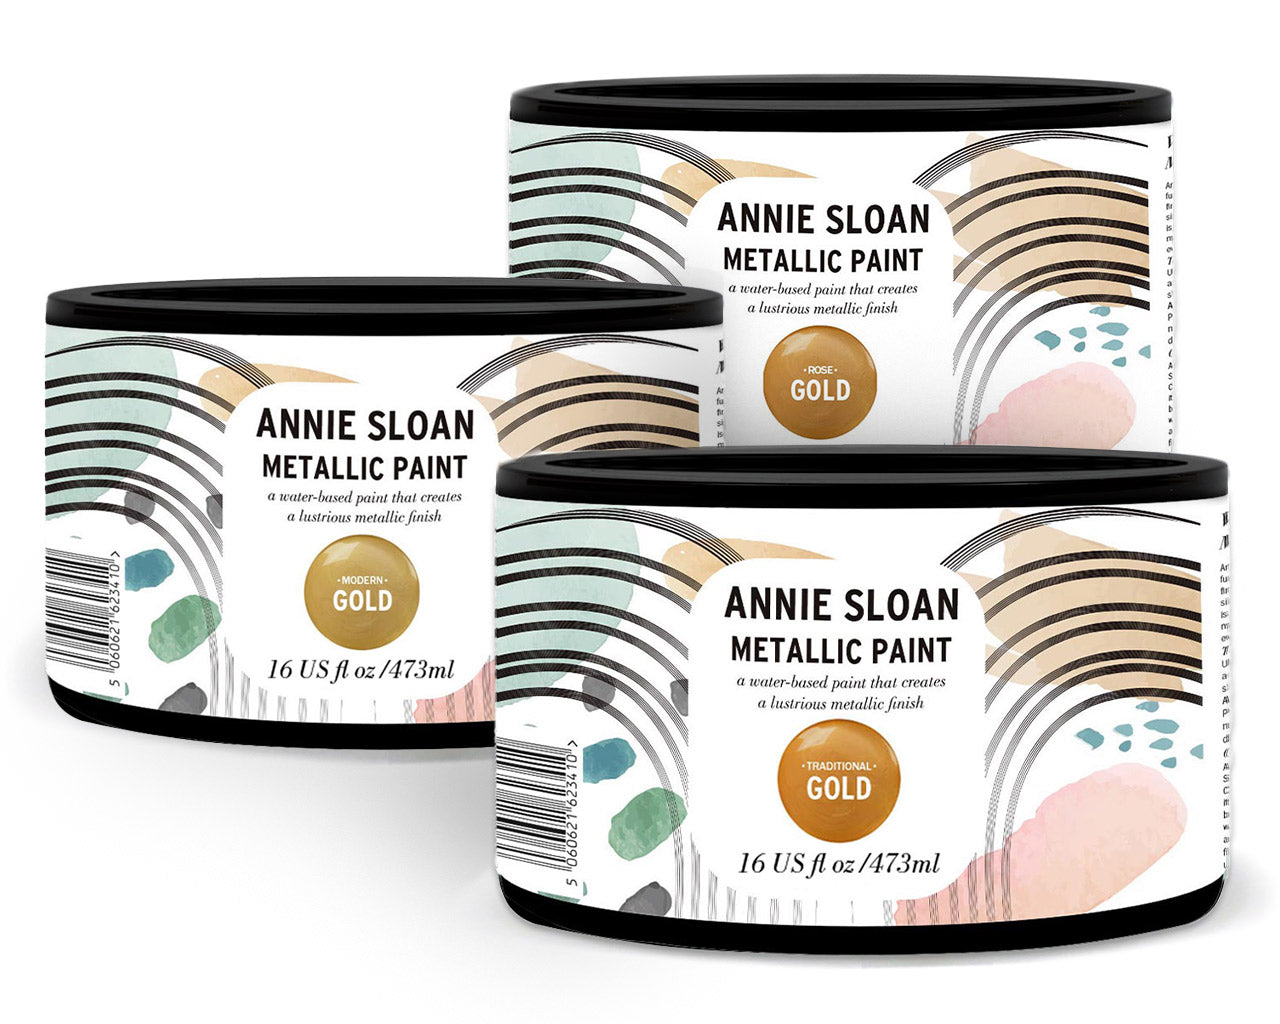 Annie Sloan Metallic Paint - The 3 Painted Pugs